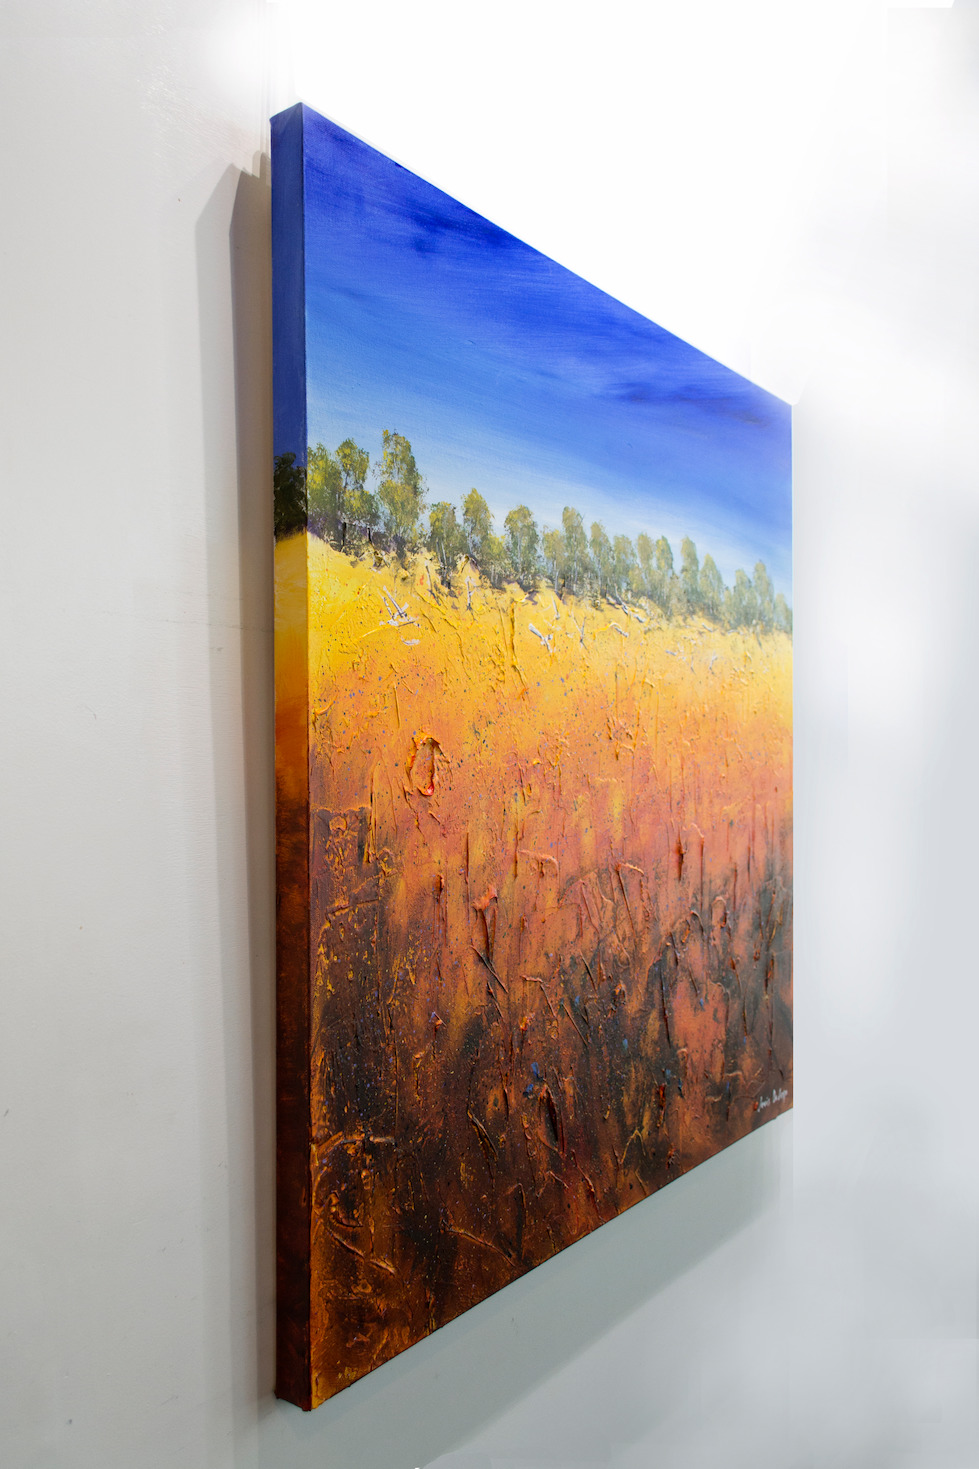 Side View Of Landscape Painting "Edge of The Simpson Desert" By Louis Dalozzo